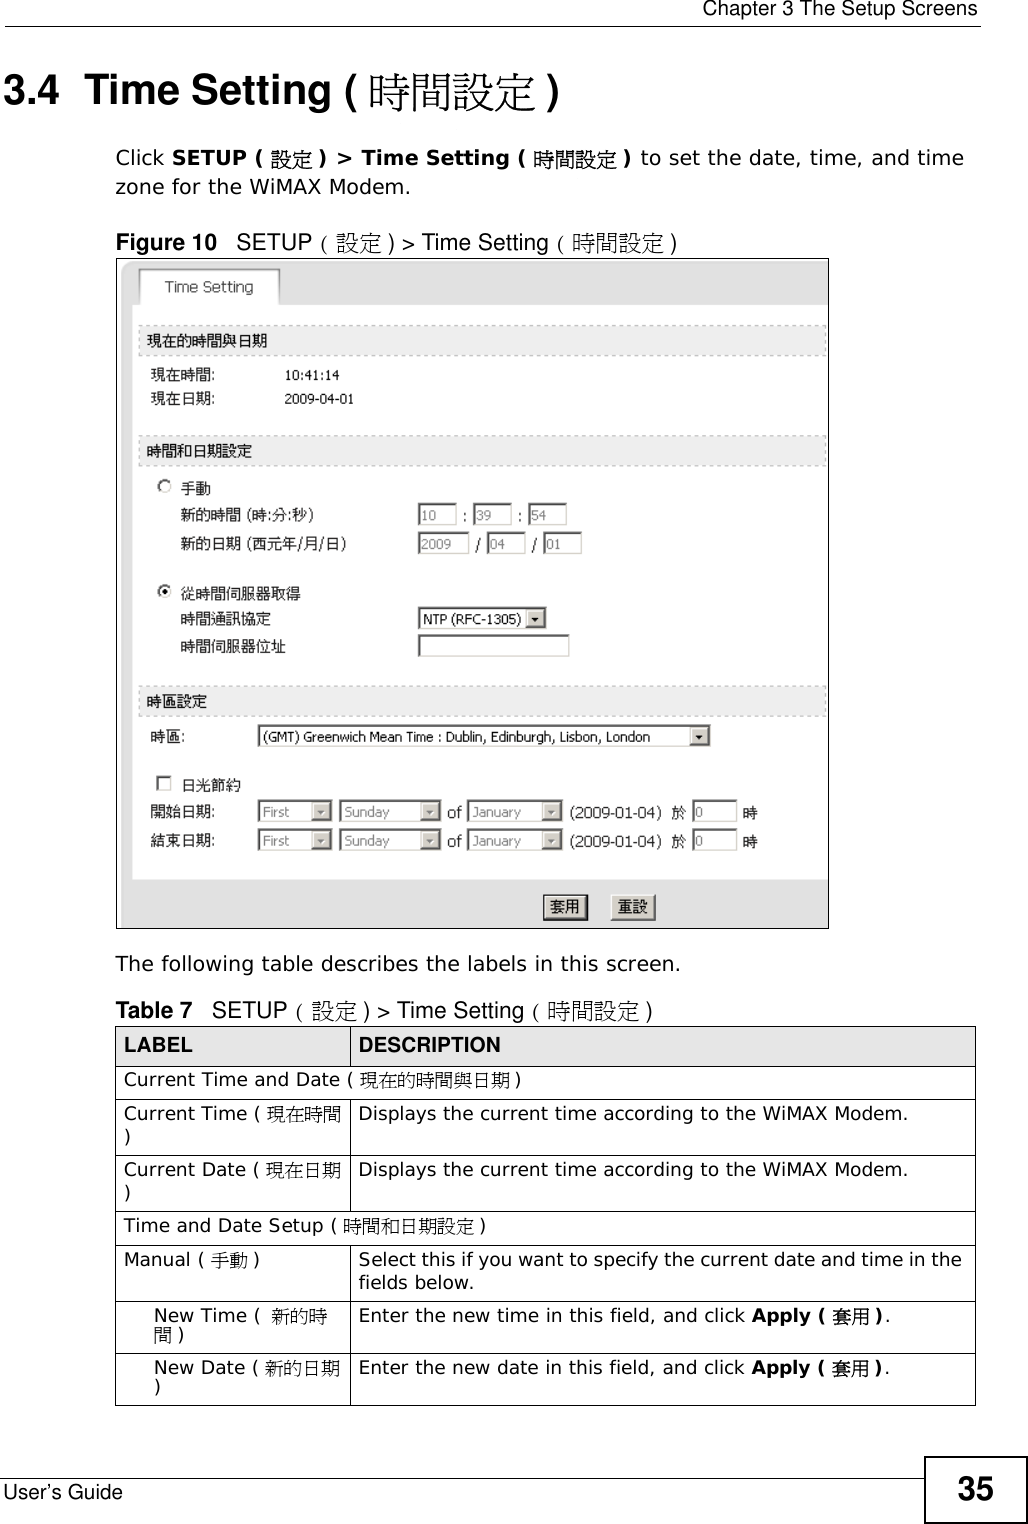  Chapter 3 The Setup ScreensUser’s Guide 353.4  Time Setting ( 時間設定 )Click SETUP ( 設定 ) &gt; Time Setting ( 時間設定 ) to set the date, time, and time zone for the WiMAX Modem.Figure 10   SETUP (設定) &gt; Time Setting (時間設定)The following table describes the labels in this screen. Table 7   SETUP (設定) &gt; Time Setting ( 時間設定 )LABEL DESCRIPTIONCurrent Time and Date ( 現在的時間與日期 )Current Time ( 現在時間)Displays the current time according to the WiMAX Modem.Current Date ( 現在日期)Displays the current time according to the WiMAX Modem.Time and Date Setup ( 時間和日期設定 )Manual ( 手動 )Select this if you want to specify the current date and time in the fields below.New Time ( 新的時間)Enter the new time in this field, and click Apply ( 套用 ).New Date ( 新的日期)Enter the new date in this field, and click Apply ( 套用 ).